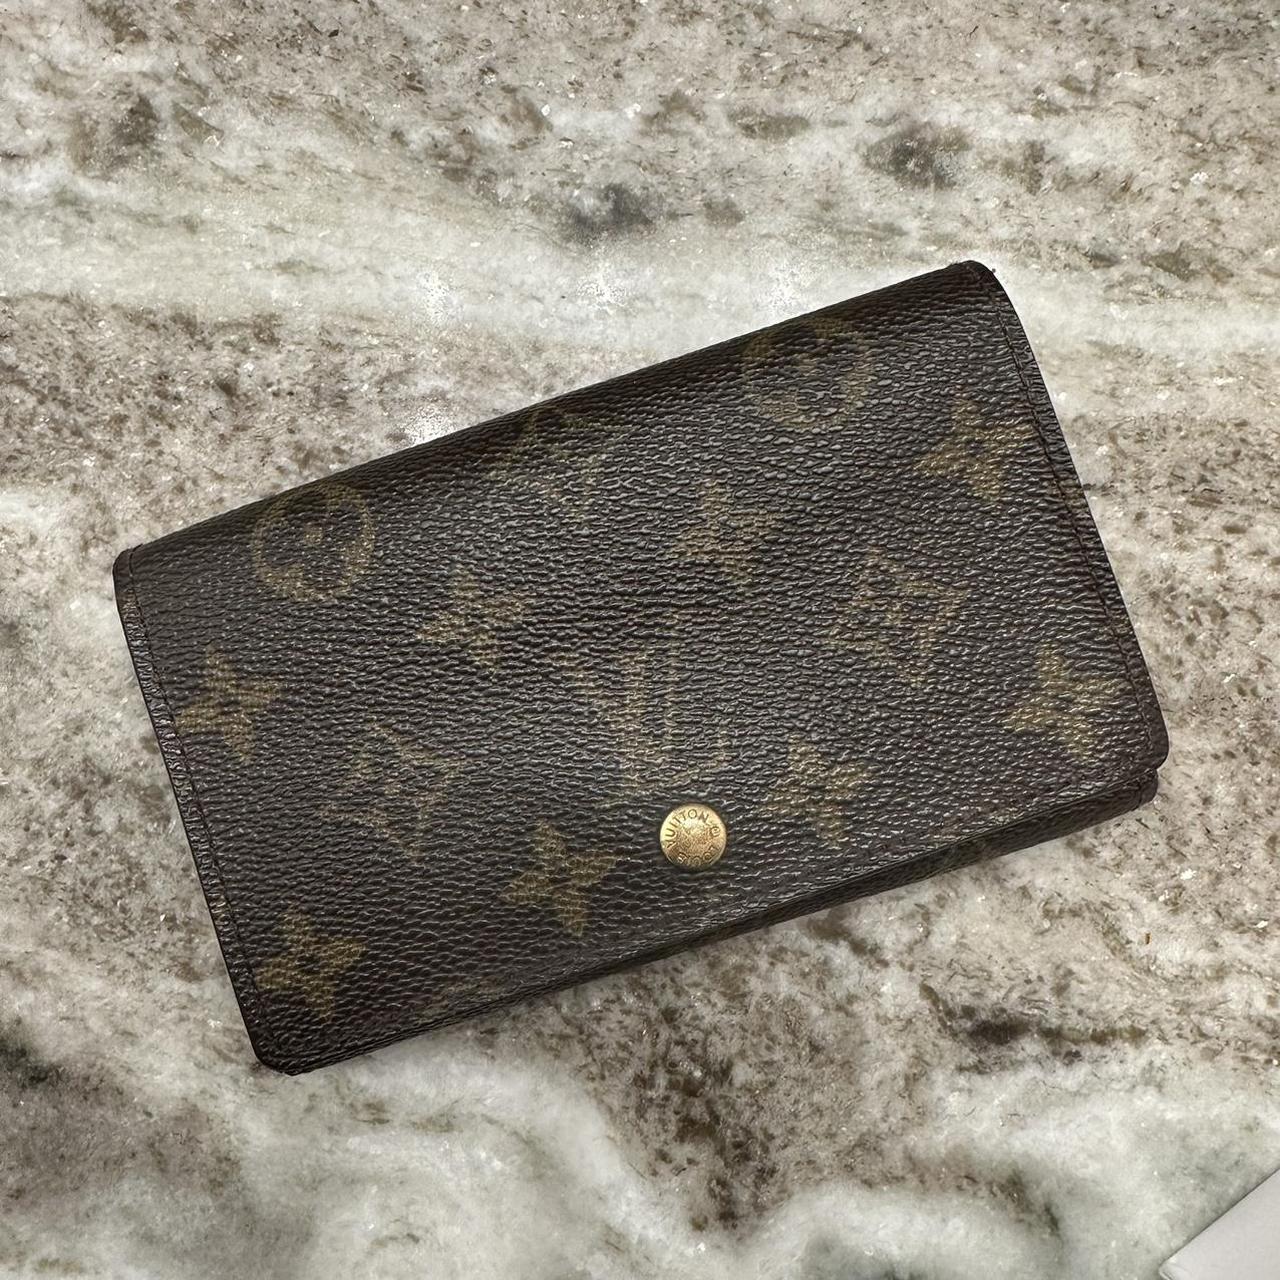 Louis Vuitton Wallet Used ▪️Preowned and Authentic - Depop